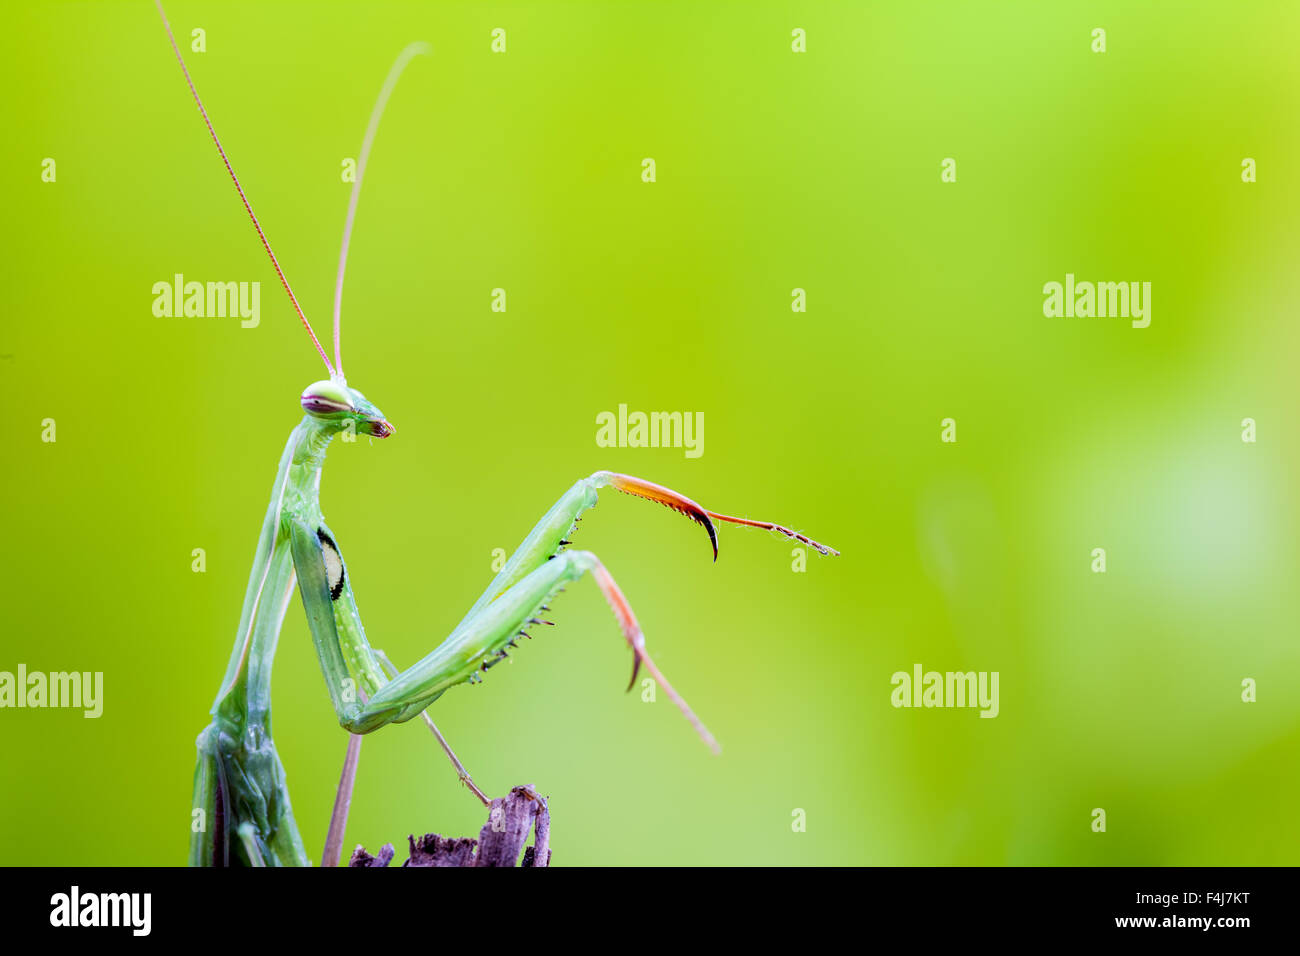 an green mantis crawling over a branch of a tree Stock Photo